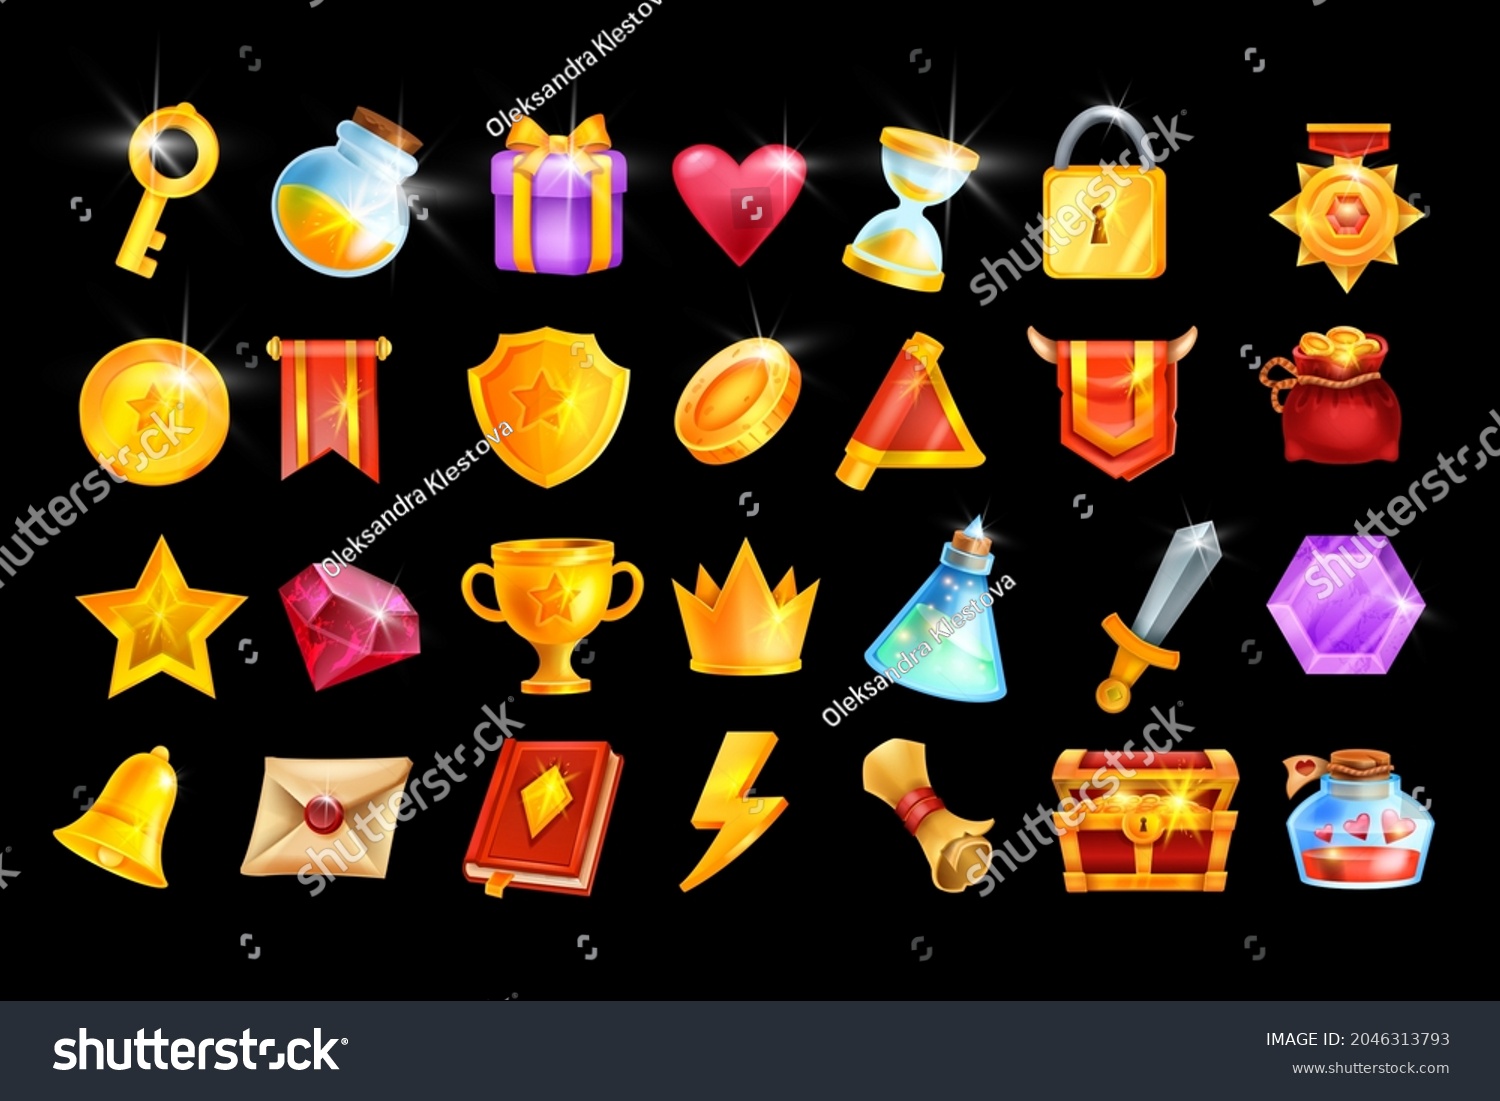 SVG of Vector game icon set, mobile casino app object kit, RPG inventory badge, golden trophy cup, medal. UI design element, winner crown, red flag, treasure chest, magic potion, coin. Online game icon pack svg